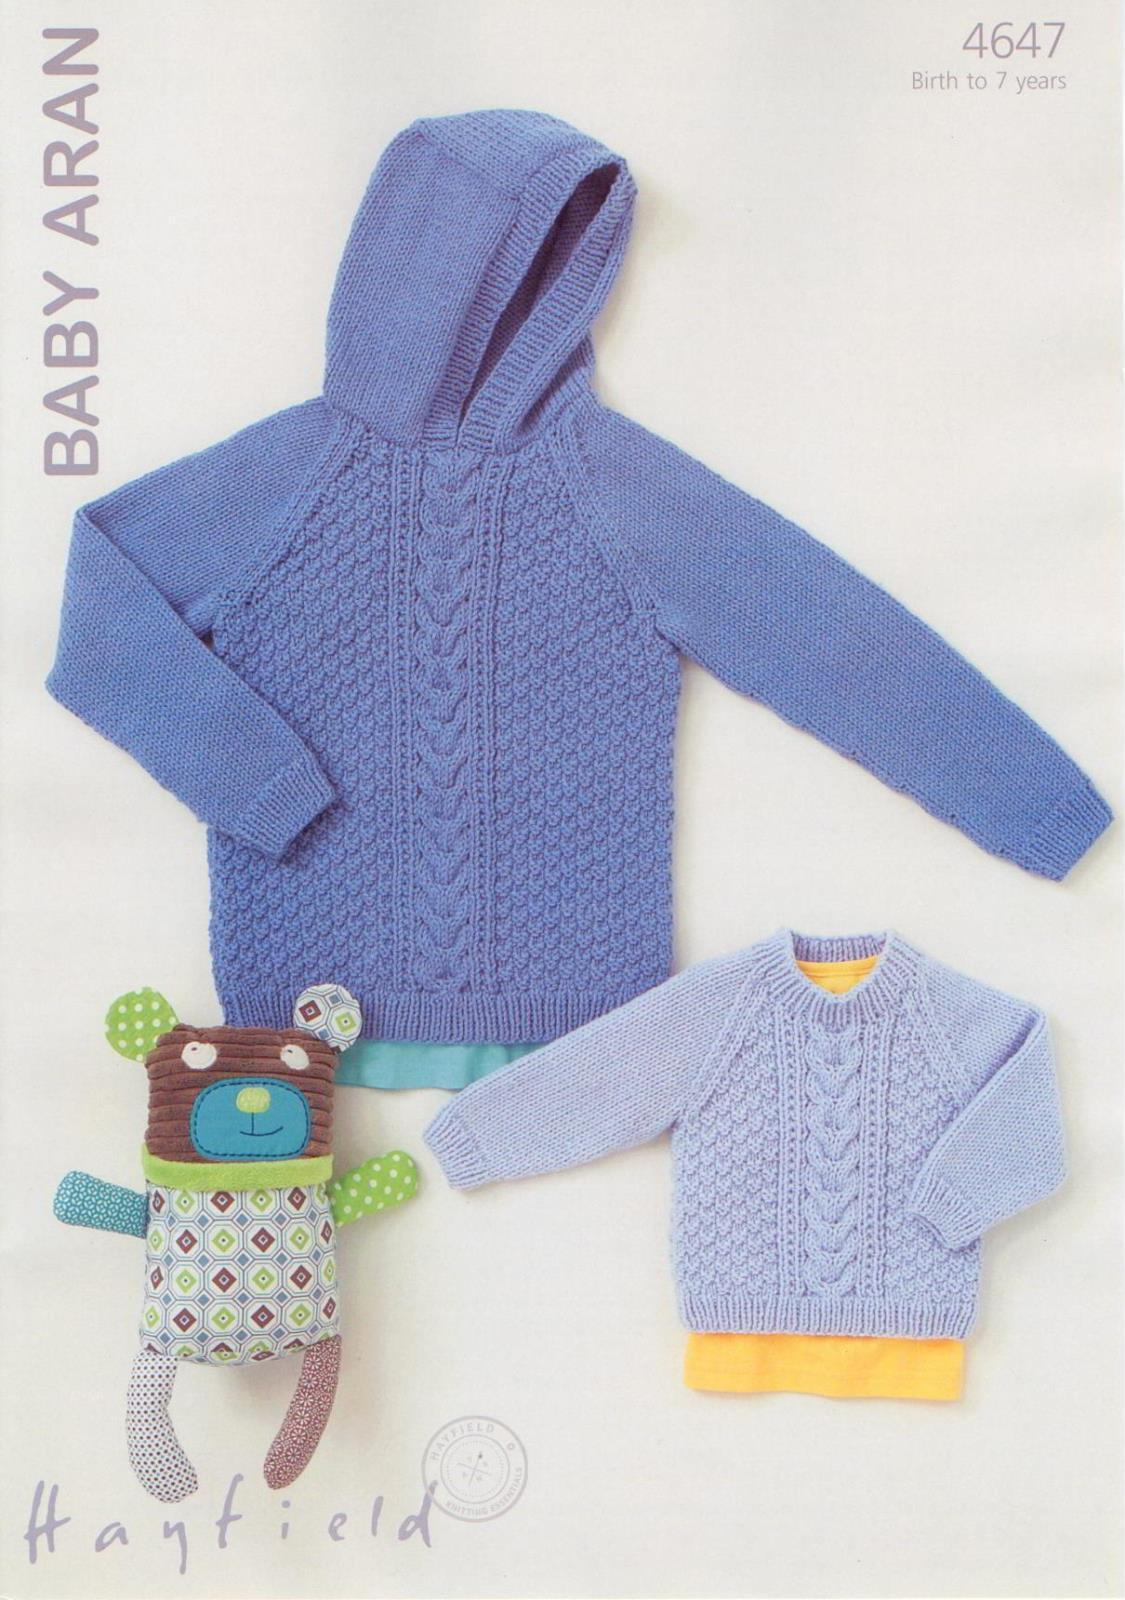 Hooded Jumper Knitting Pattern 4647 Hayfield Ba Aran Round Neck Hooded Sweater Knitting Pattern To Fit Birth To 7 Years